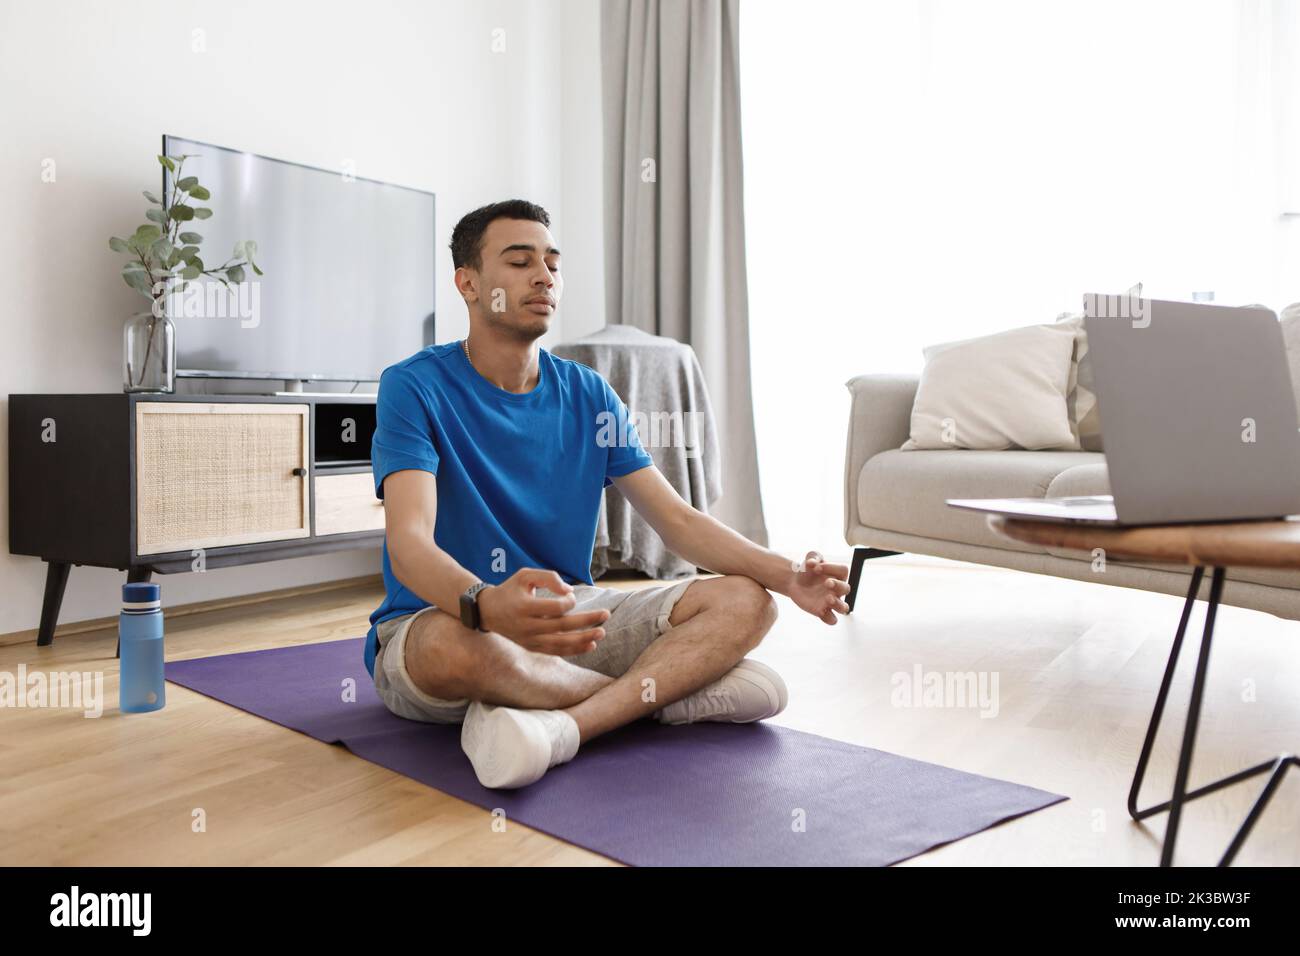 Morning meditation concept. Arab guy practicing yoga, meditating with closed eyes in front of laptop, copy space Stock Photo